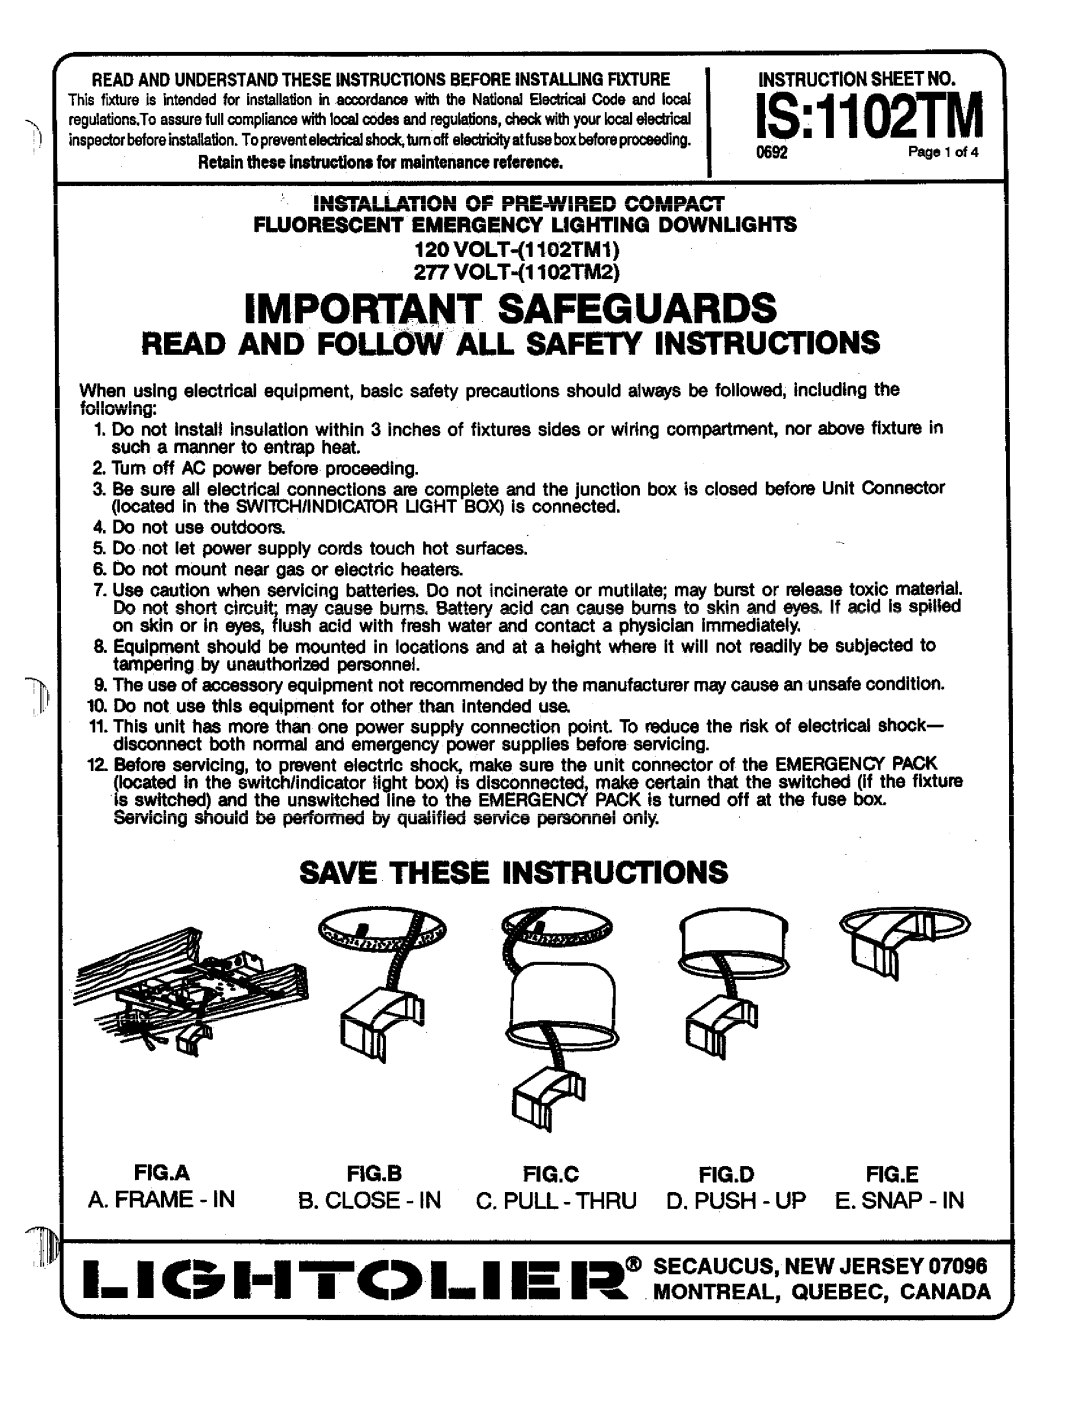 Lightolier 1102TM instruction sheet Read And Follow “All Safety In=Ructions, SAVE THESE lNSrRUCrlONS T,pgv, Fig.A, Fig.B 